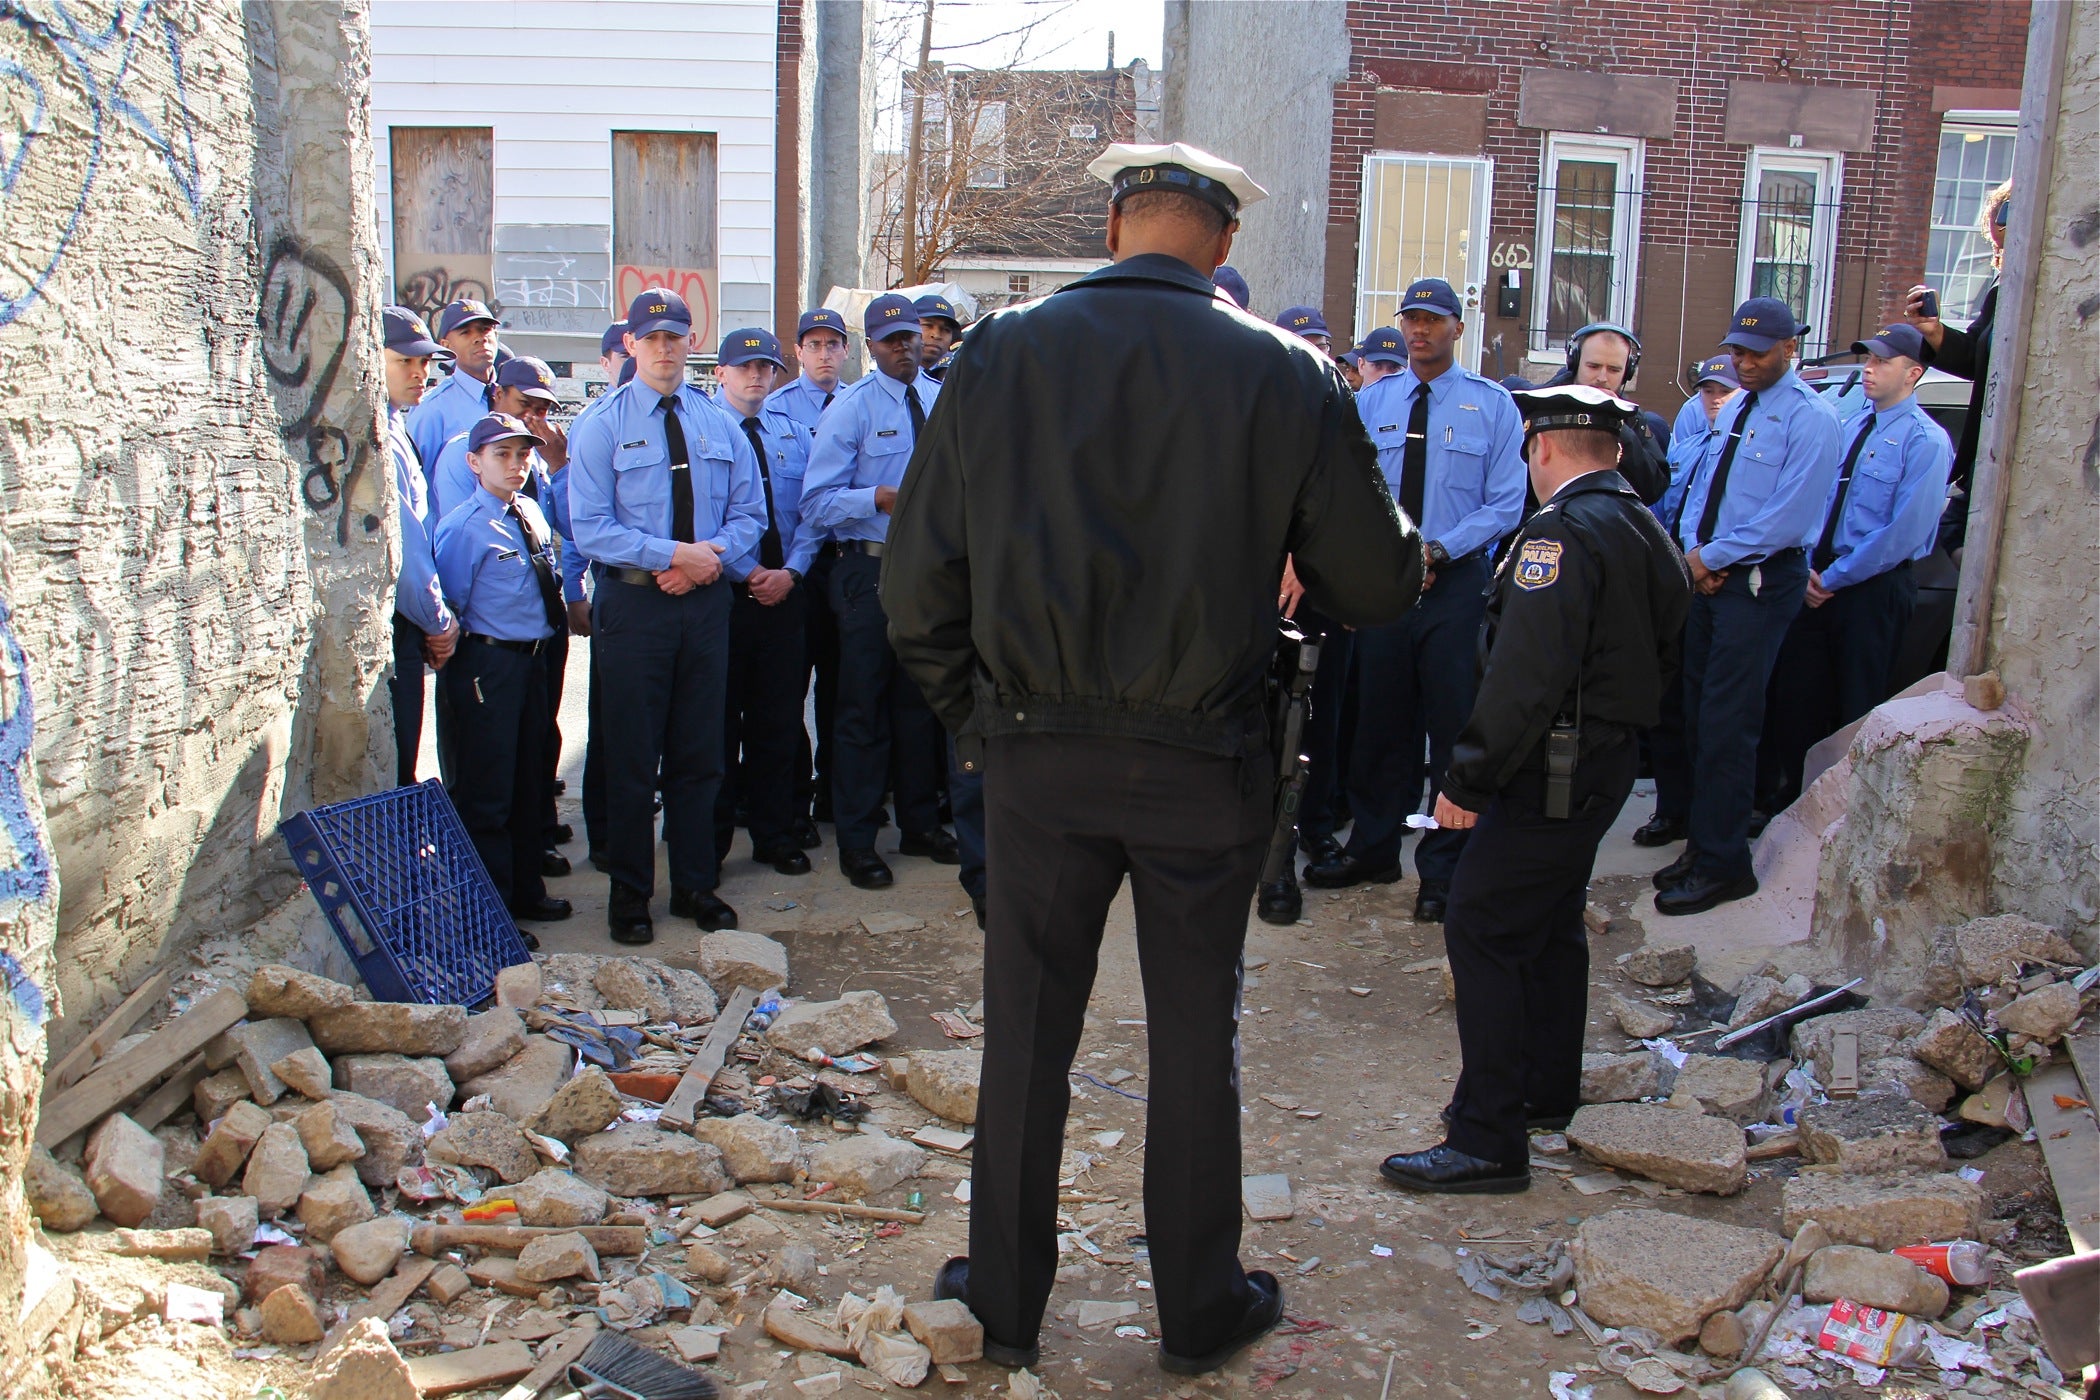 Philly Police Recruits Get Up Close Tour Of Kensington Neighborhood Whyy 1371